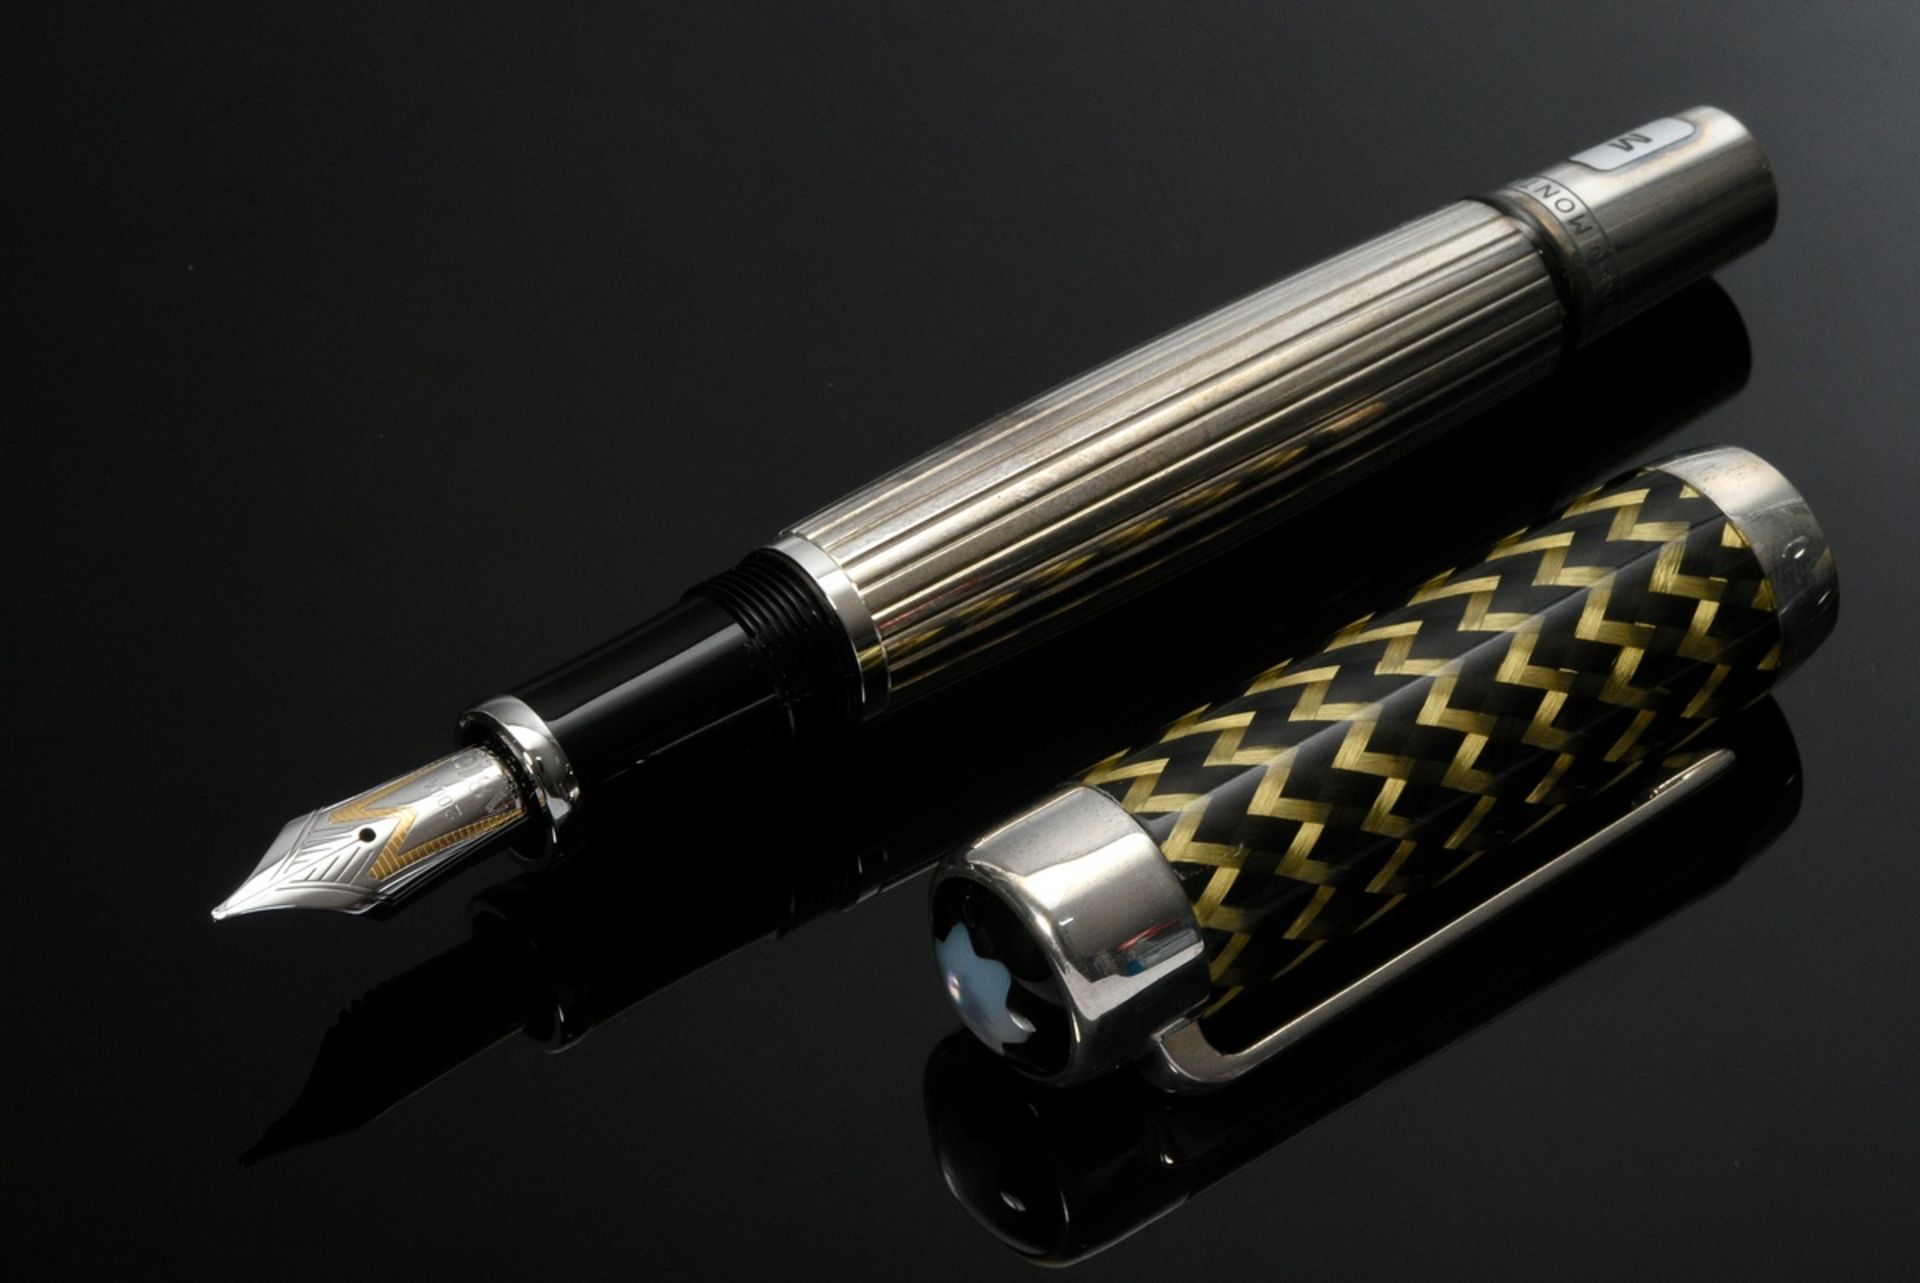 Montblanc piston fountain pen "Hommage à J. Pierpont Morgan" from the special edition "Patron of Ar